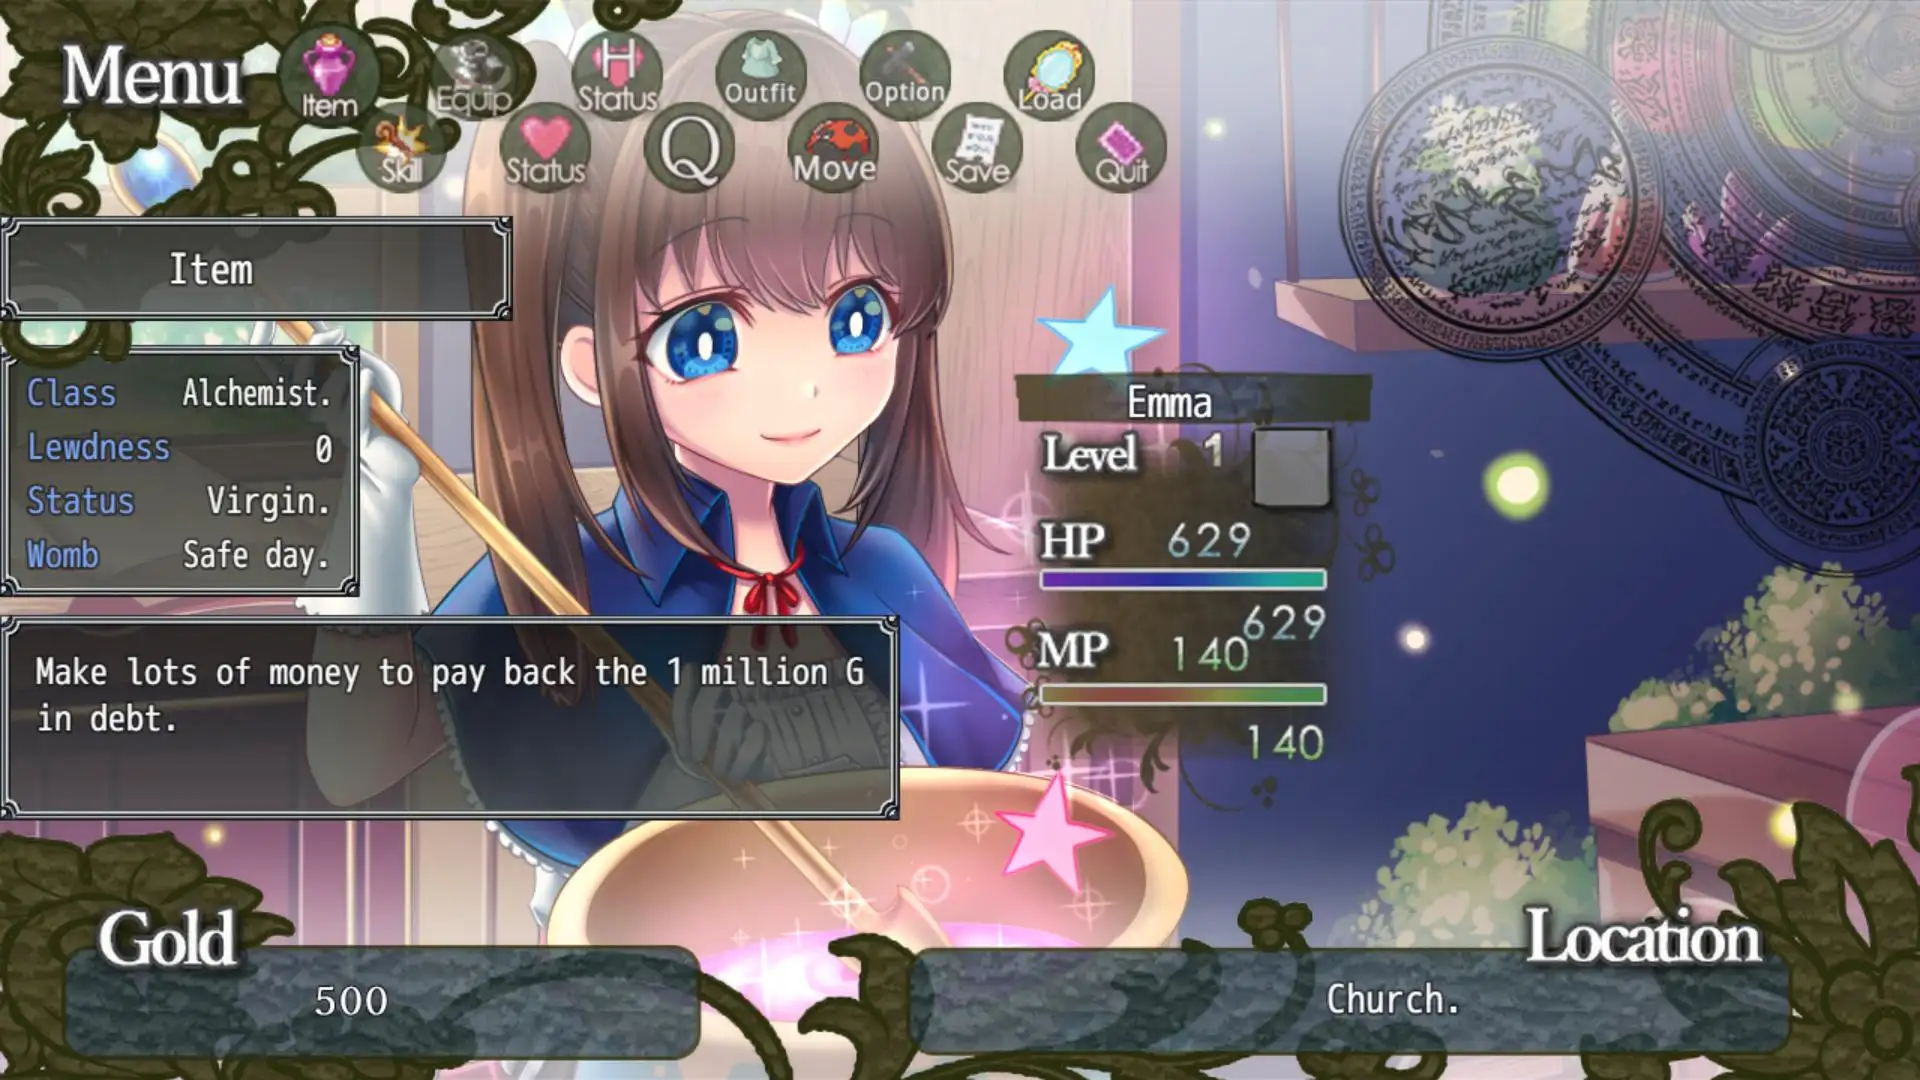 Emma the Alchemist's Debt Story Android Port